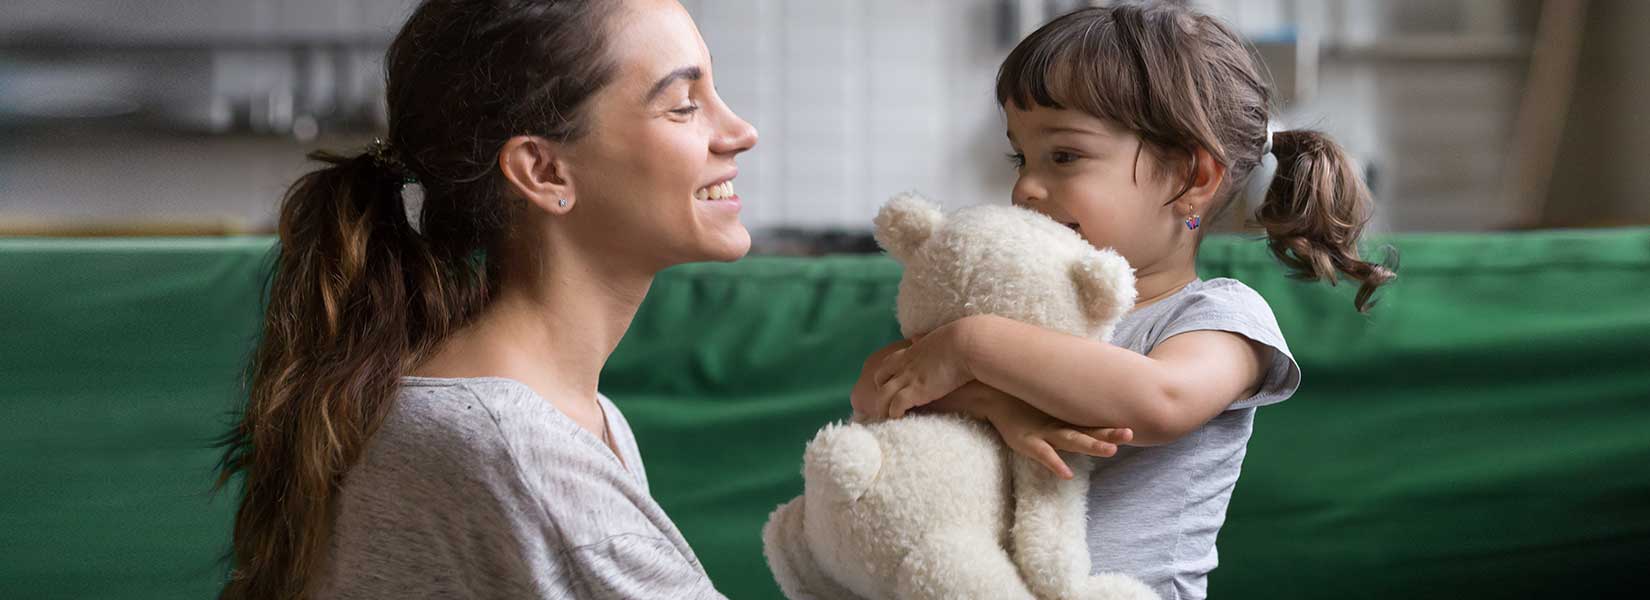 are you and your partner truly prepared to adopt a child in san antonio?